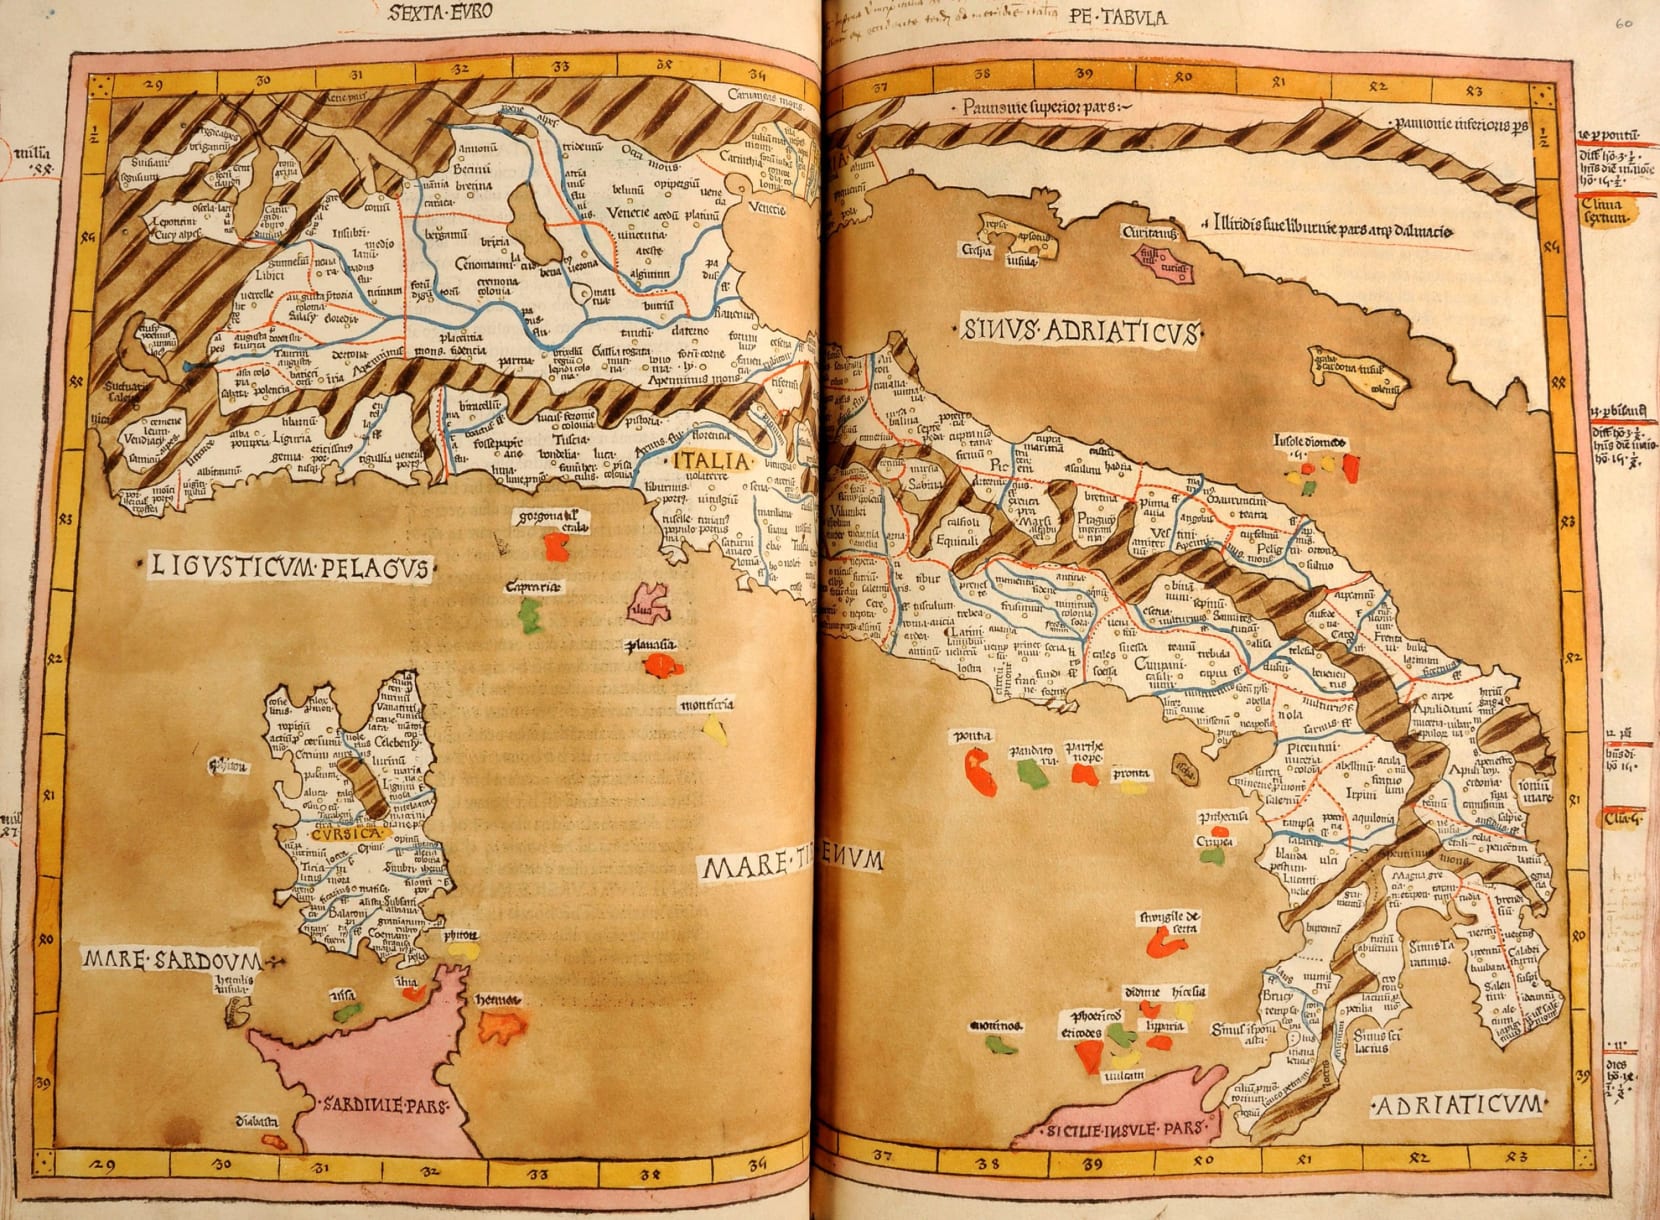 •	An open book showing a printed map of Italy, hand-coloured mainly in shades of brown.